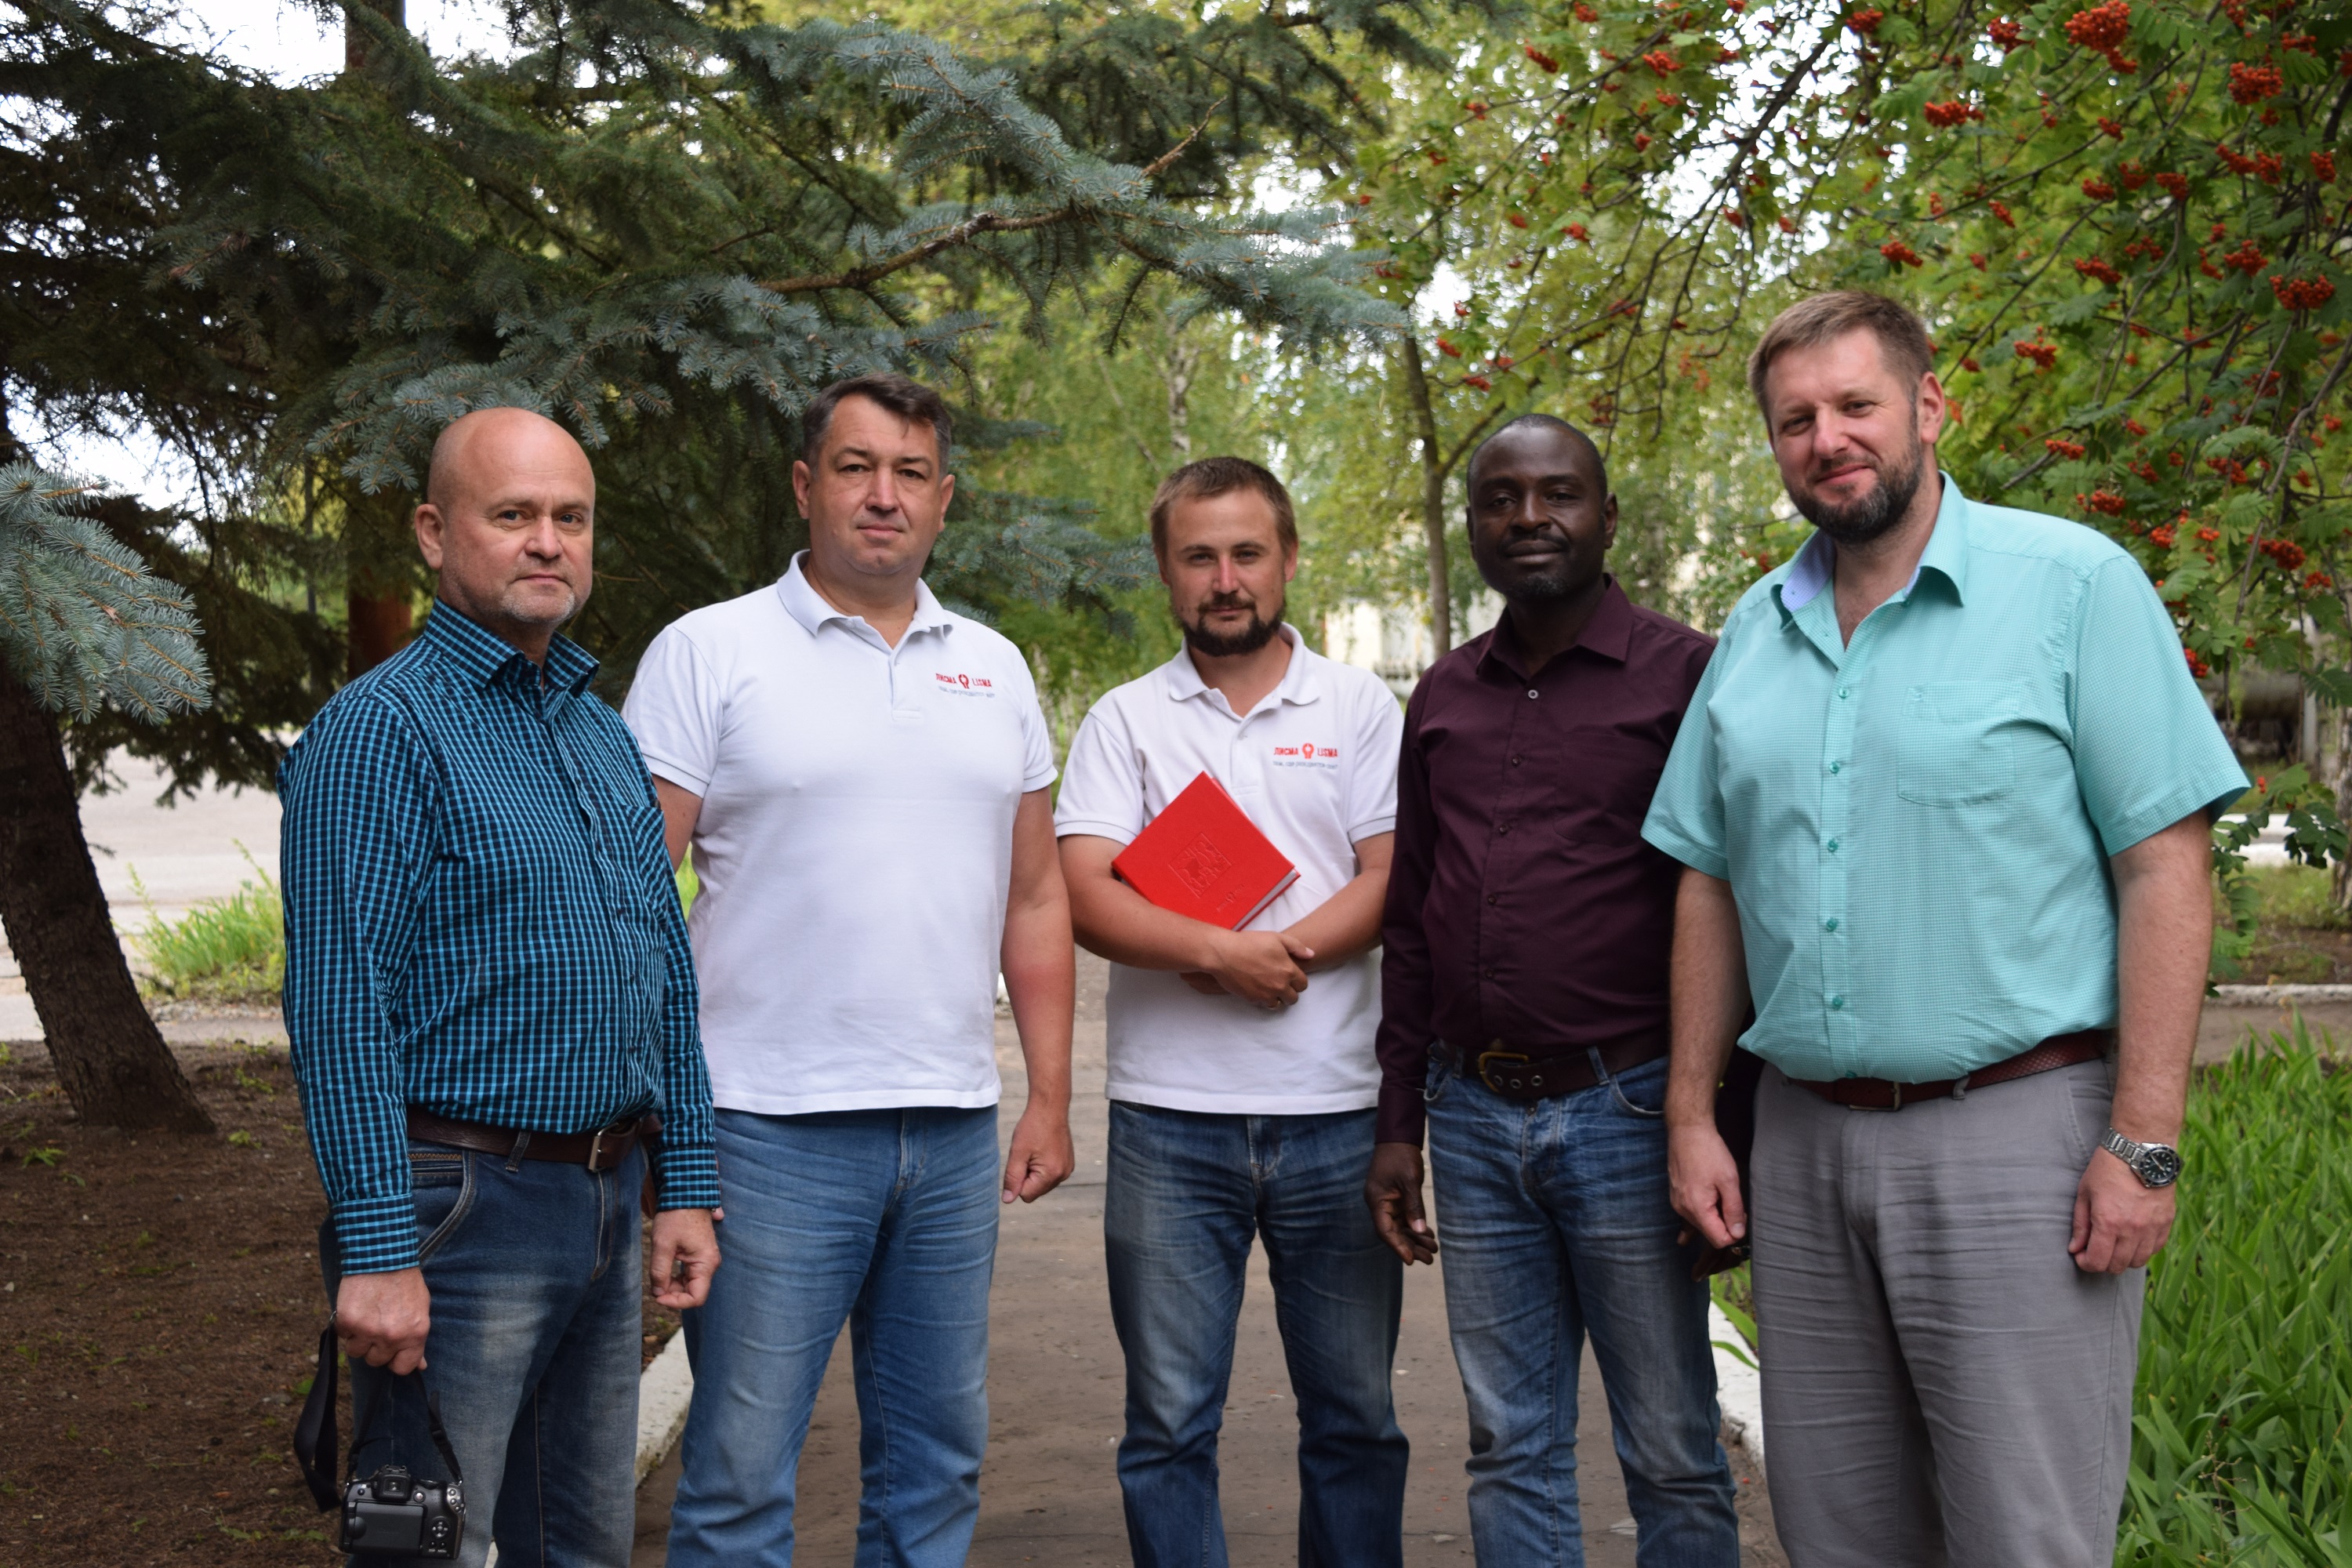 Delegation from the Democatic Republic of the Congo visited LISMA